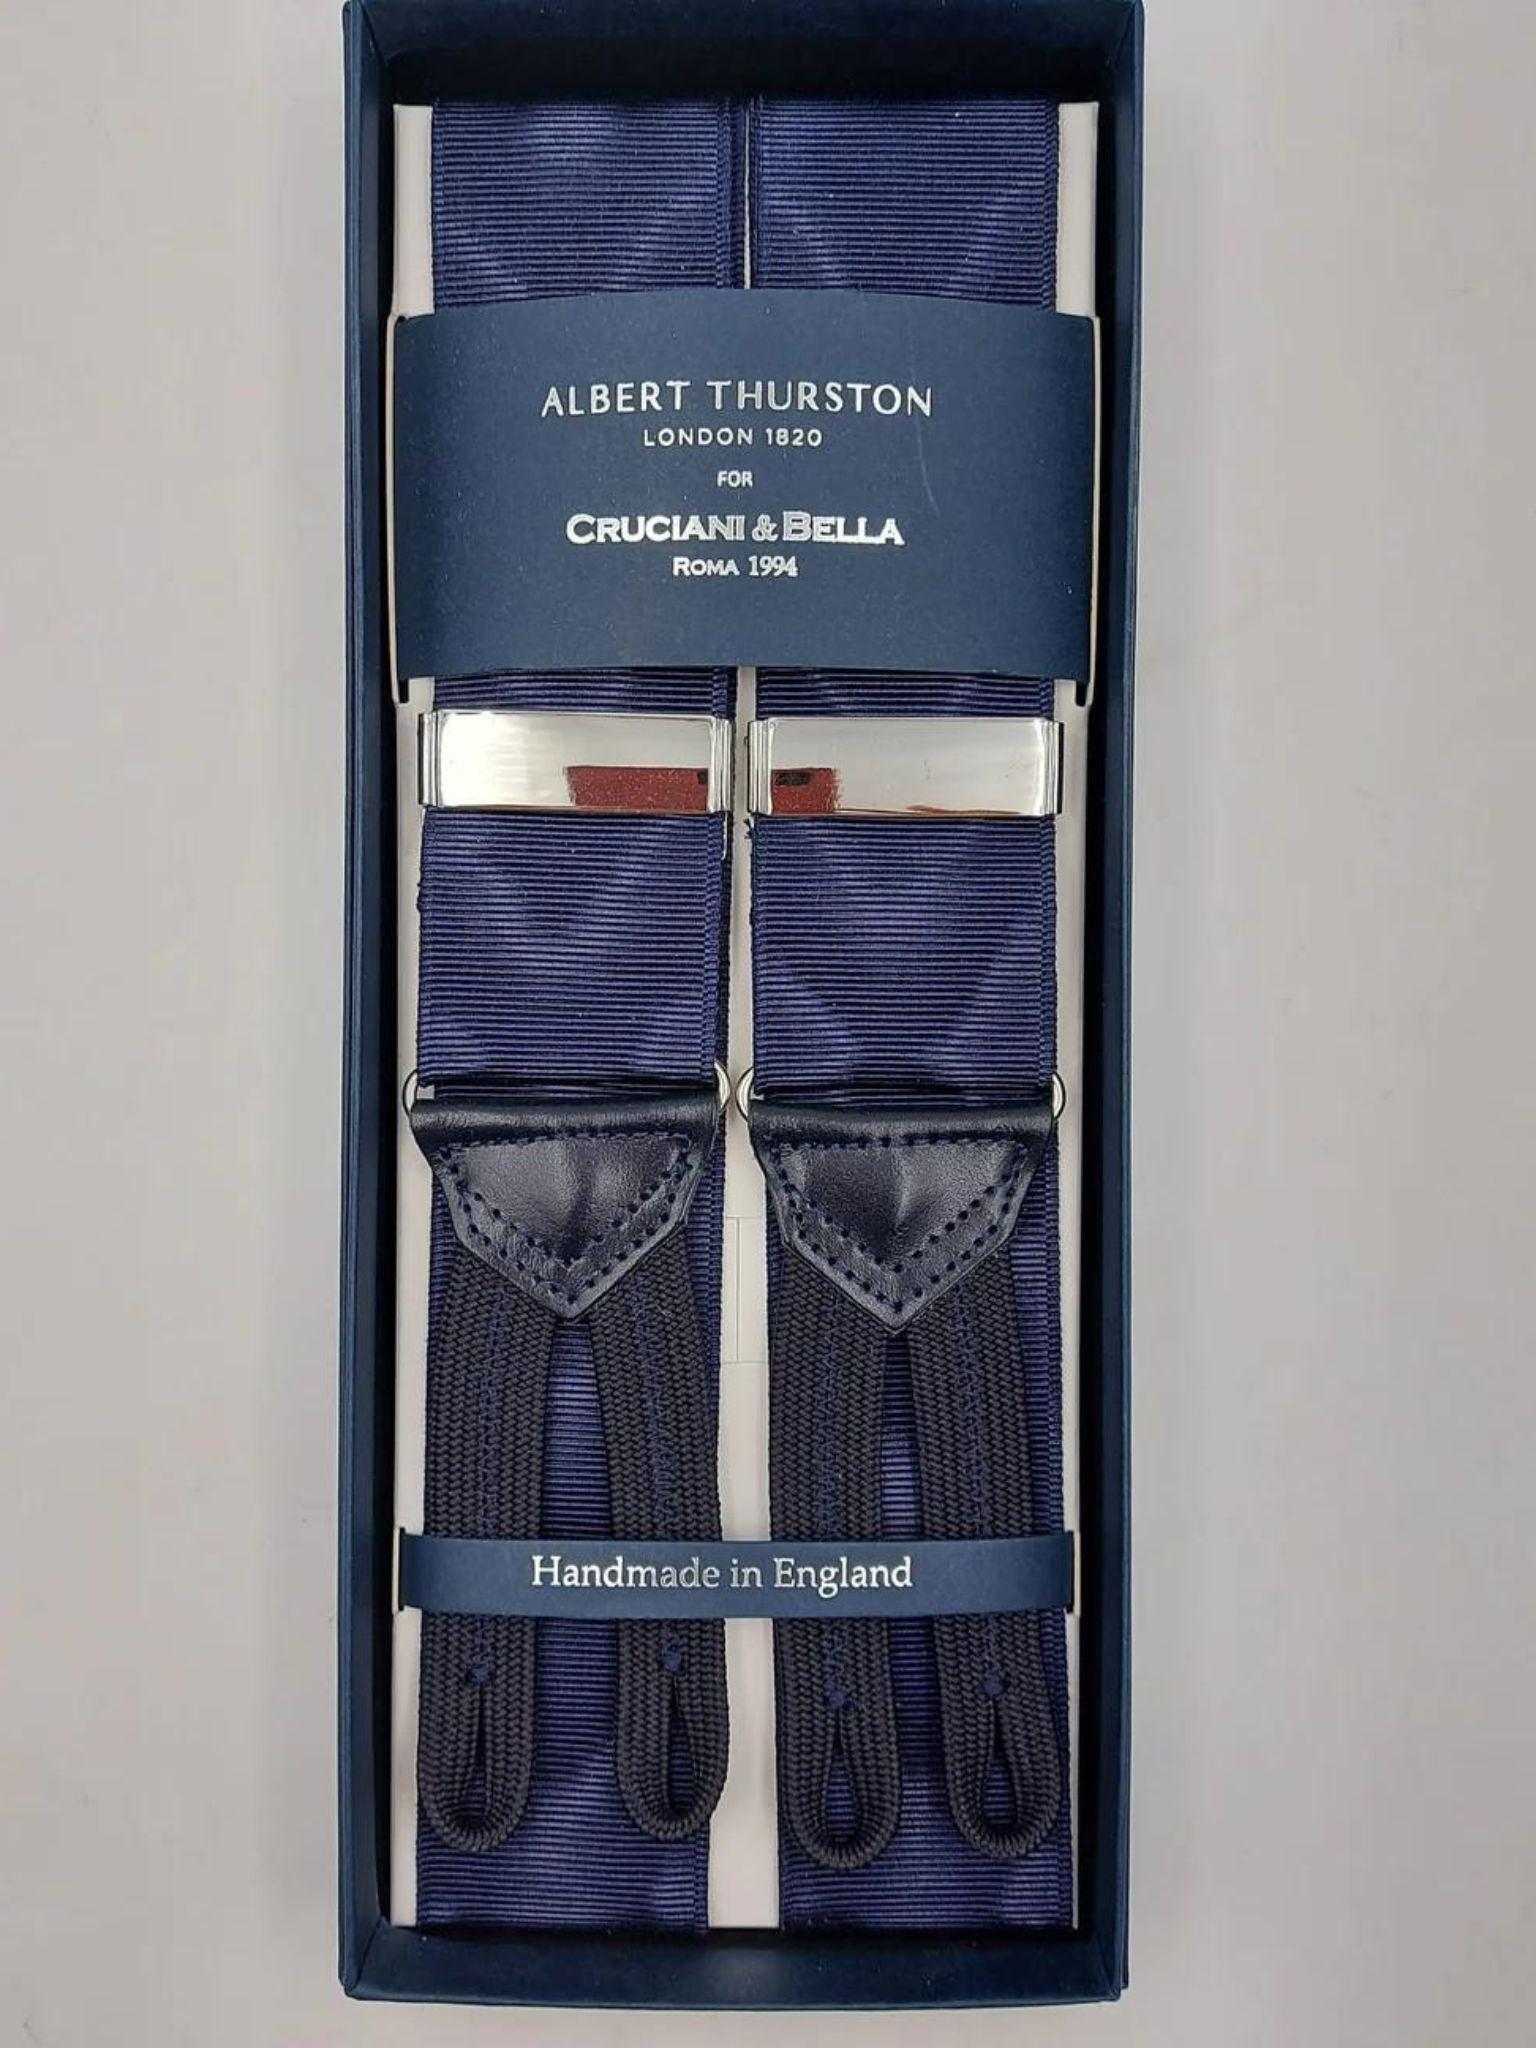 Albert Thurston for Cruciani & Bella Made in England Adjustable Sizing 40 mm Woven Barathea Navy Blue Moirè Plain Color Braces Braid ends Y-Shaped Nickel Fittings Size: XL